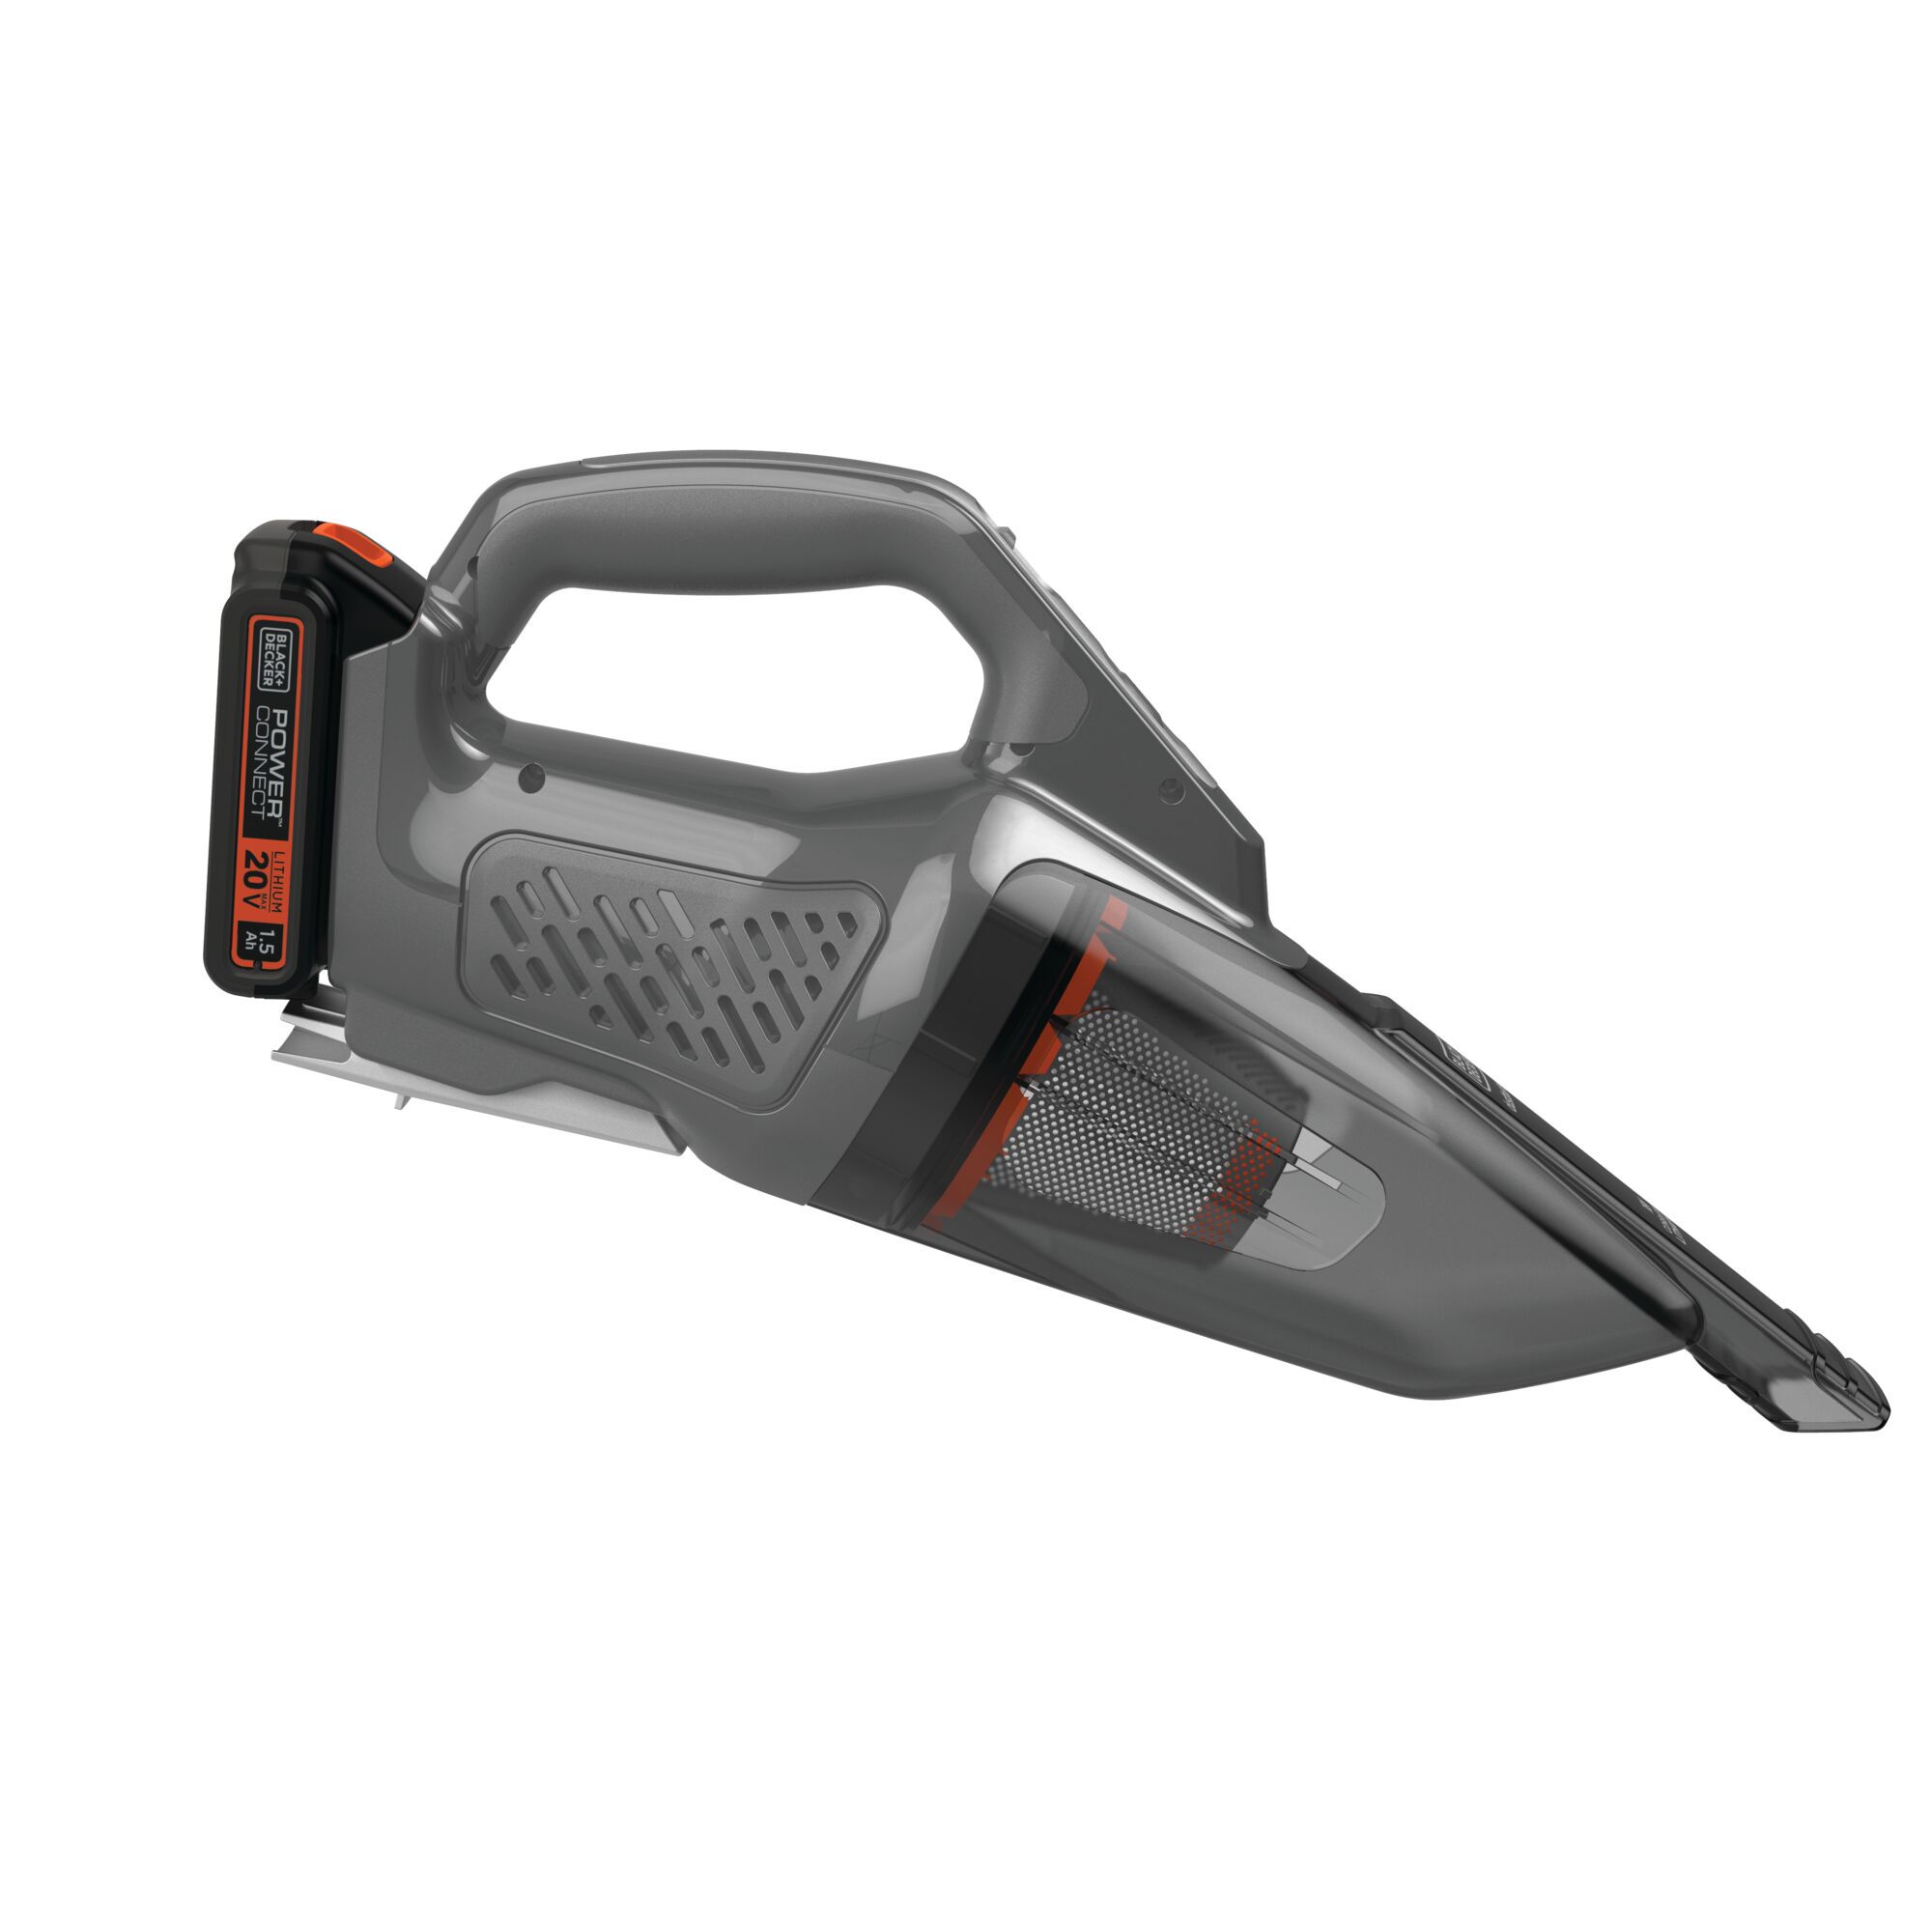 Profile view of Black and Decker Dustbuster 20V MAX* POWERCONNECT Cordless Handheld Vacuum